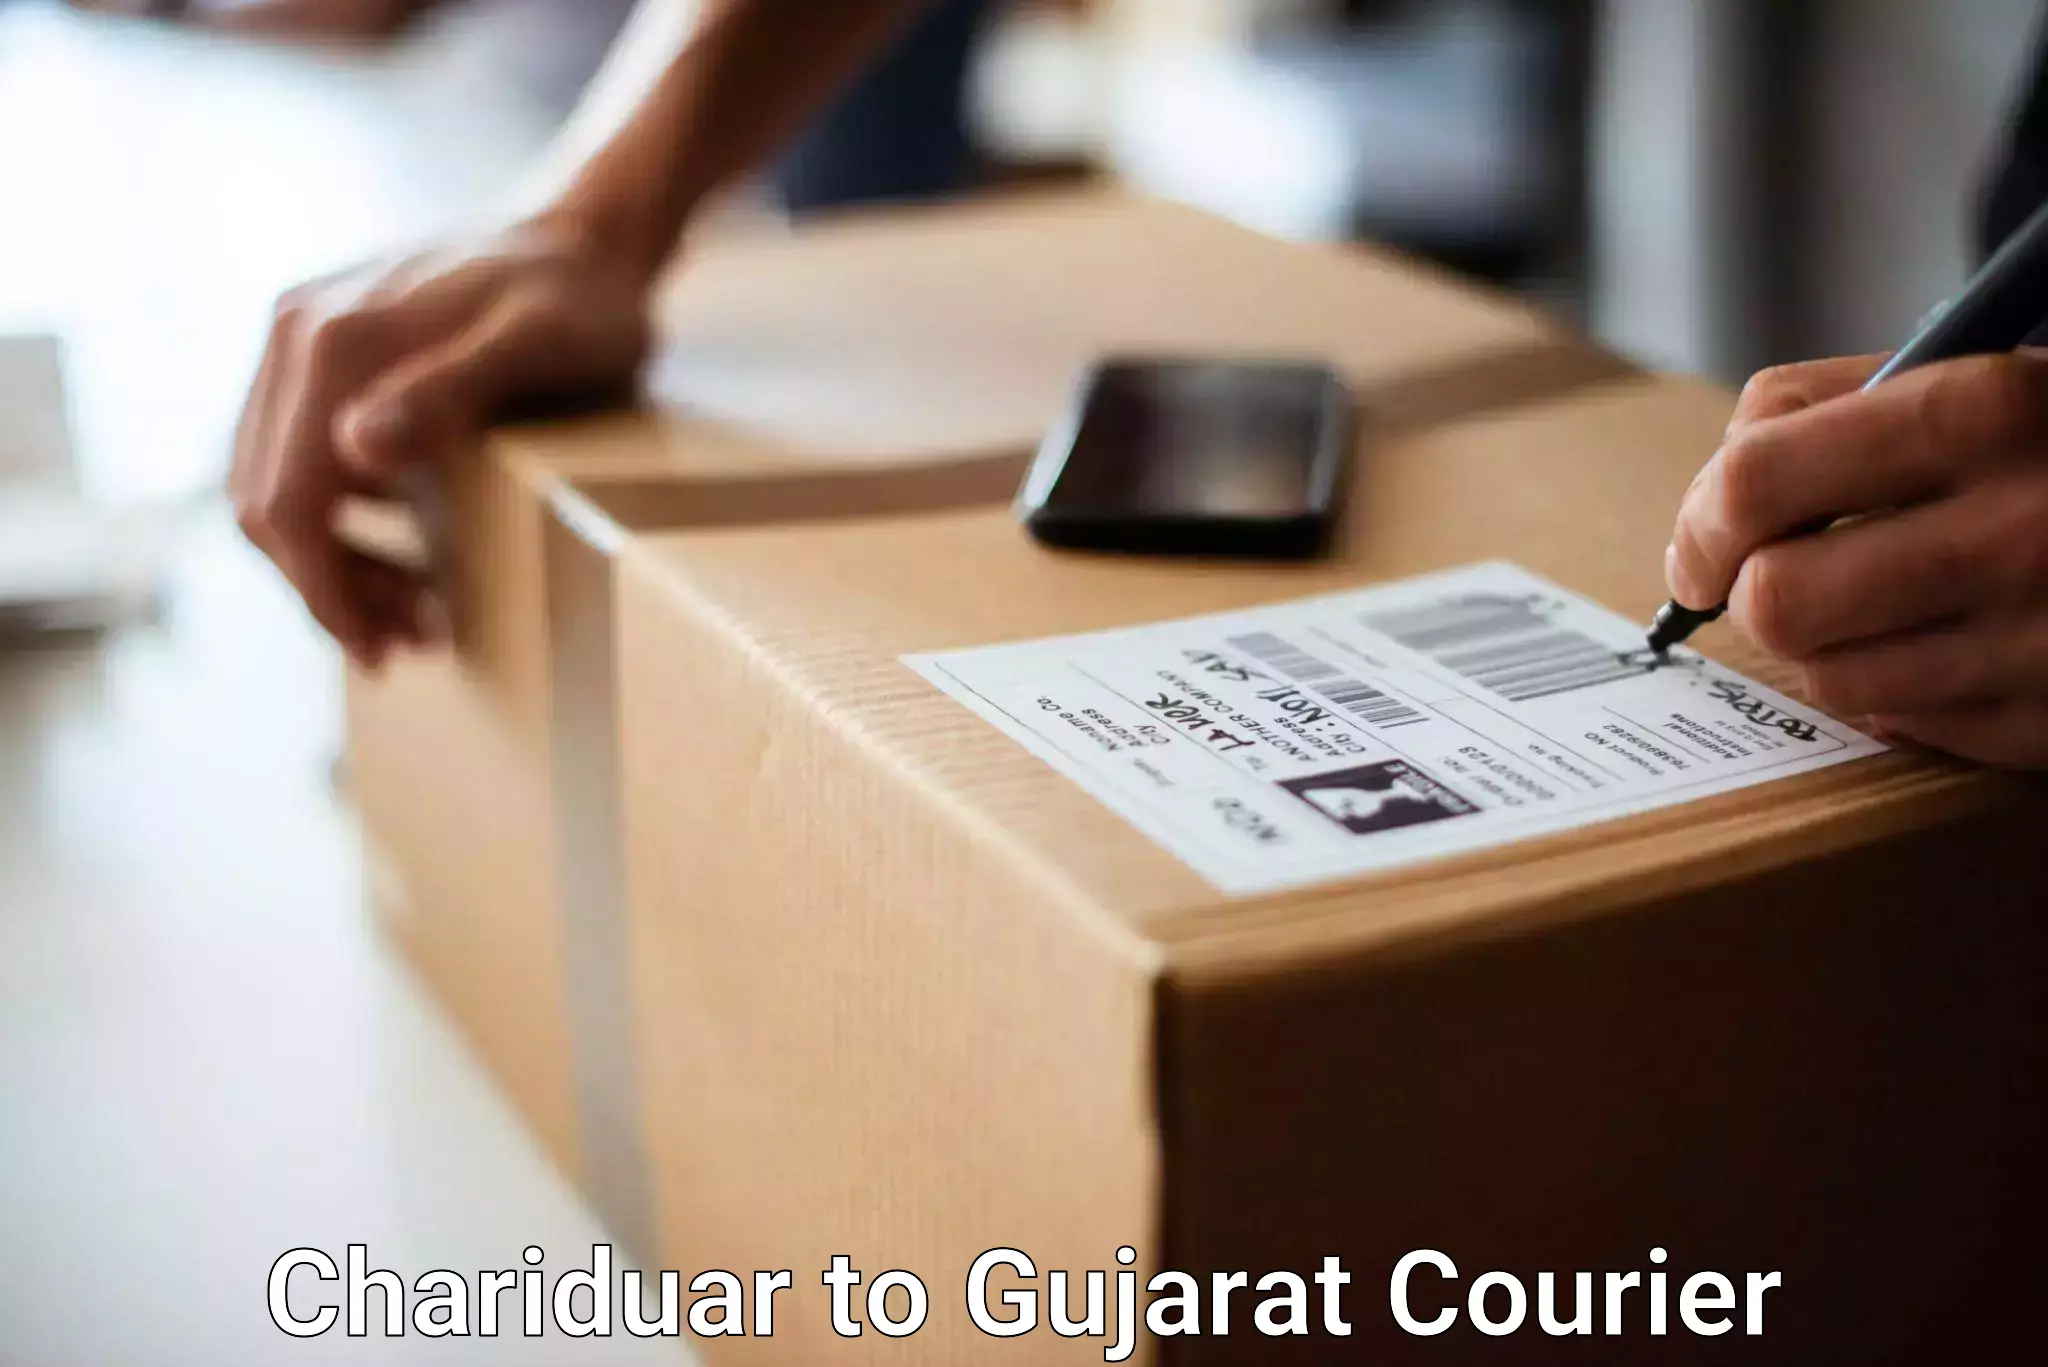 Luggage delivery network Chariduar to Ahmedabad